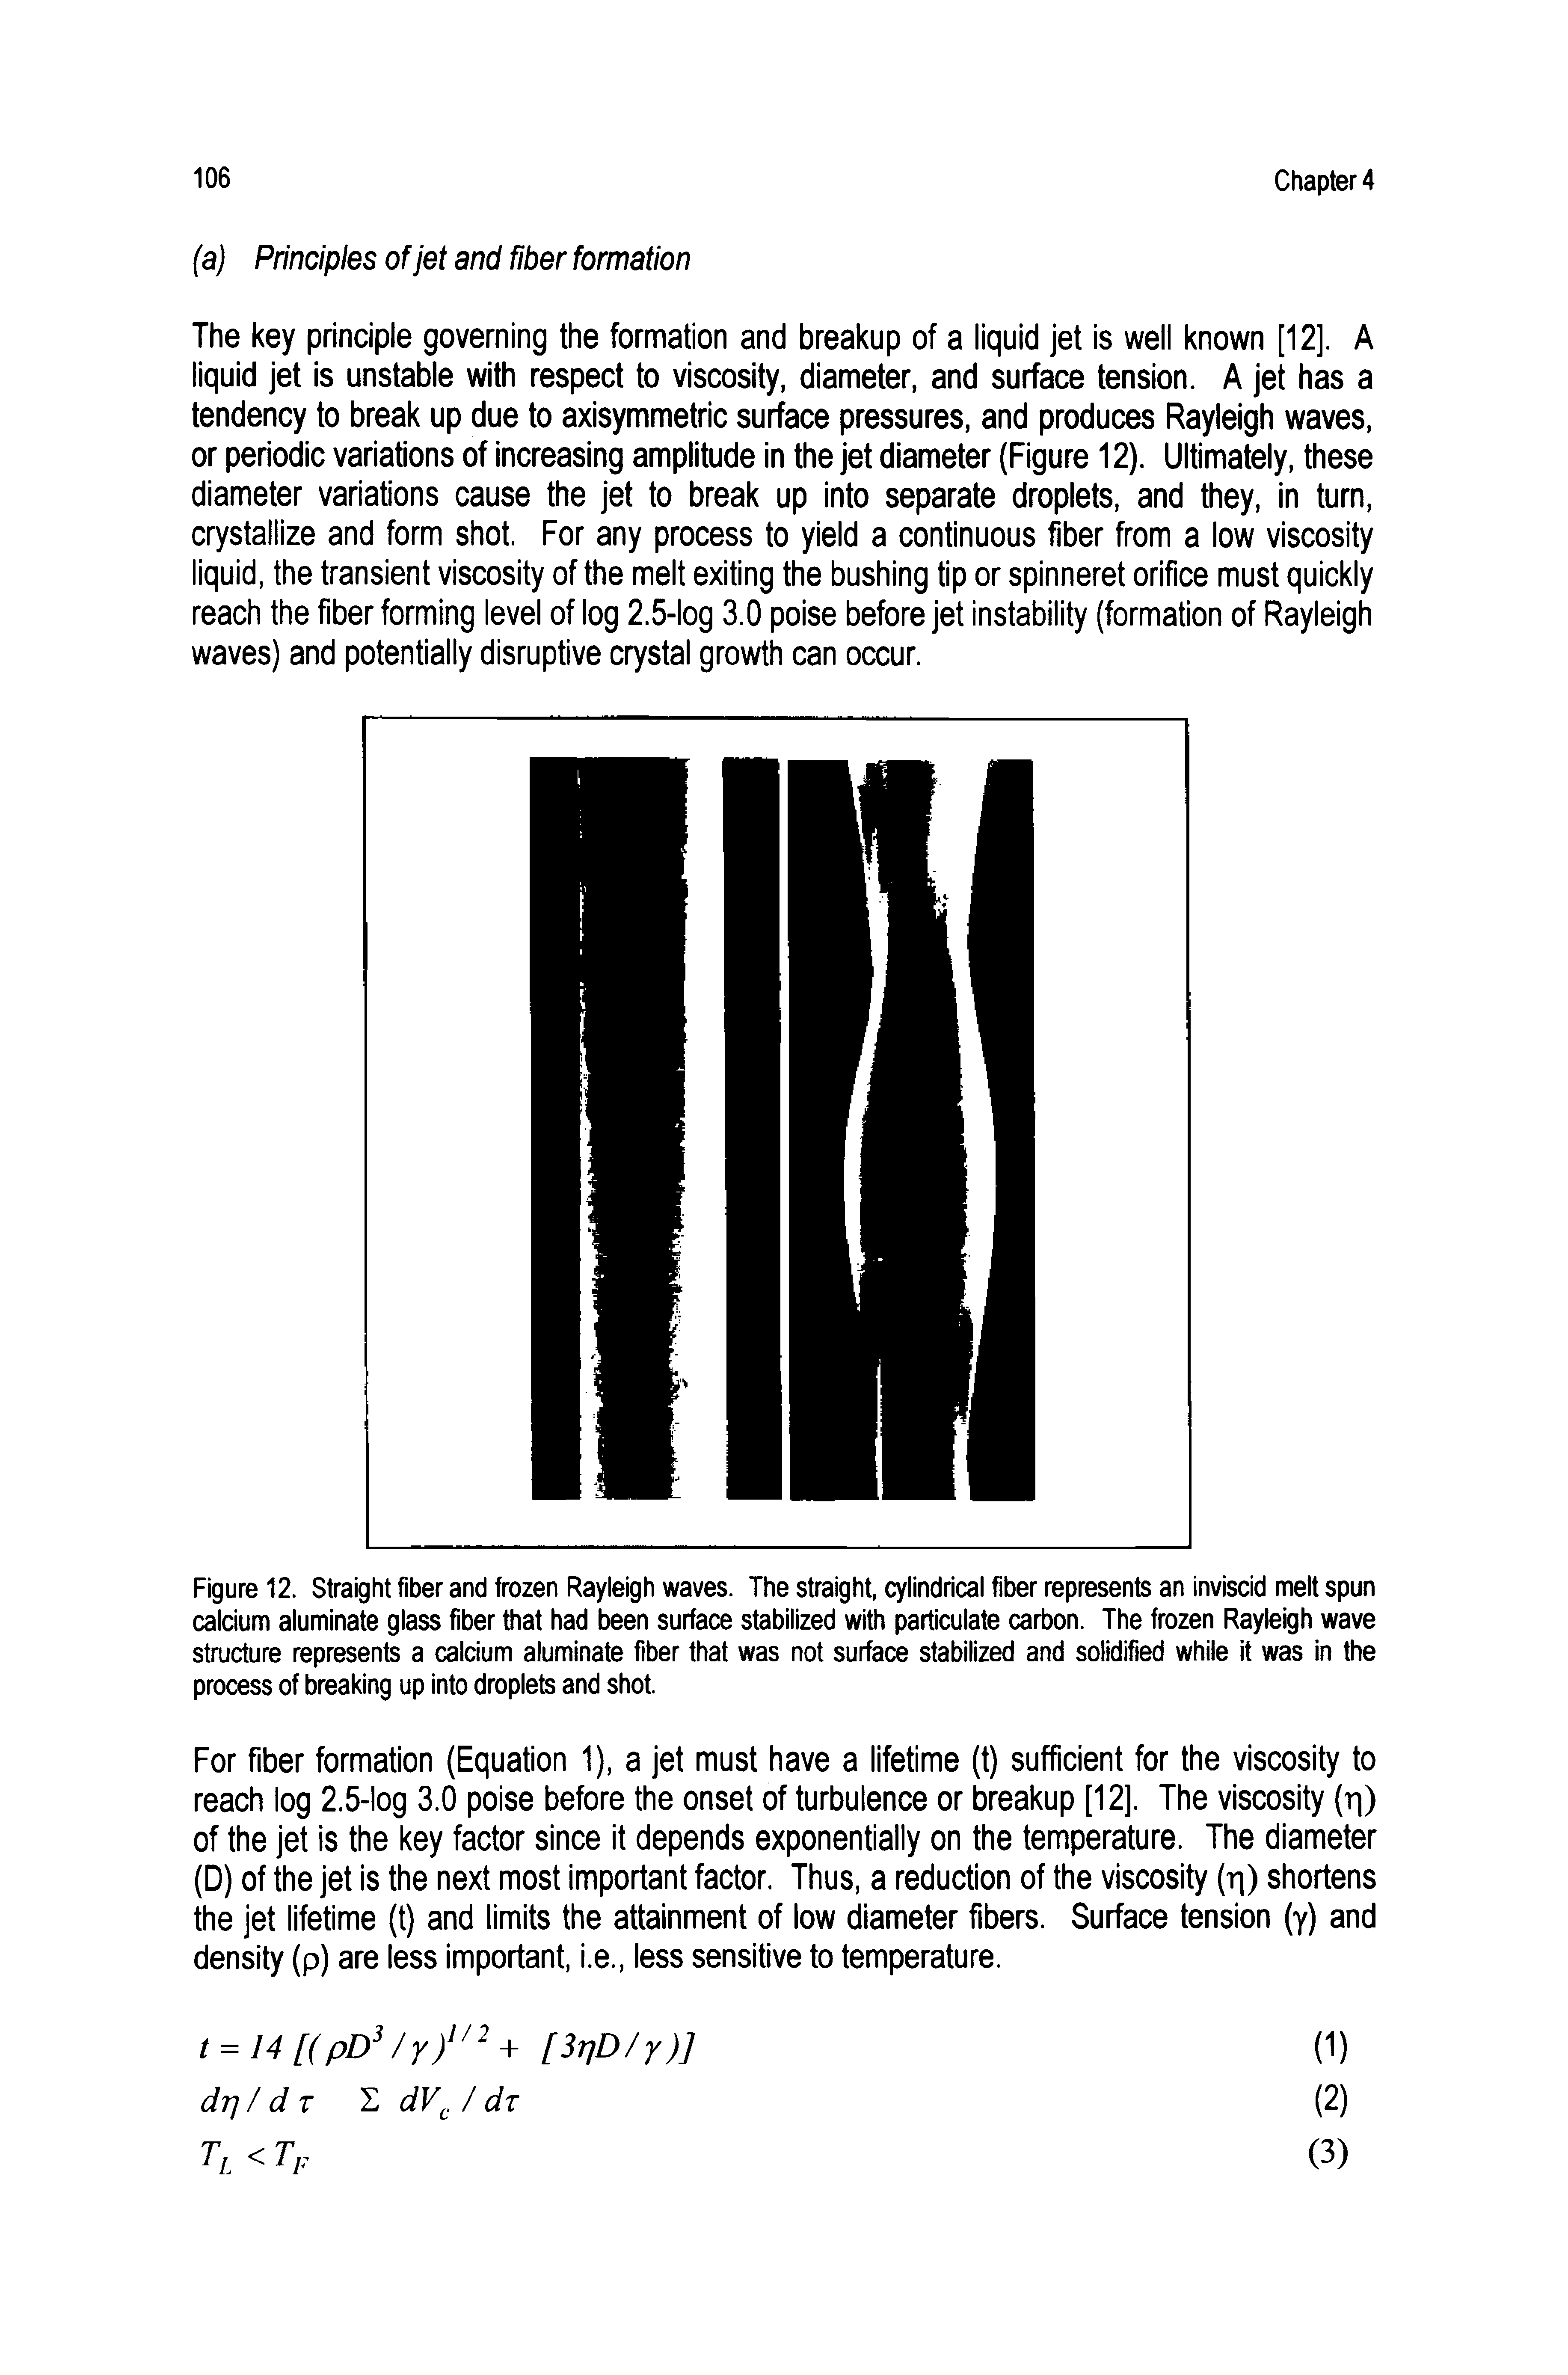 Figure 12. Straight fiber and frozen Rayieigh waves. The straight cyiindrical fiber represents an inviscid meit spun caidum aluminate glass fiber that had been surface stabilized with particulate carbon. The frozen Rayleigh wave strudure represents a caidum aluminate fiber that was not surface stabilized and solidified while it was in the process of breaking up into droplets and shot...